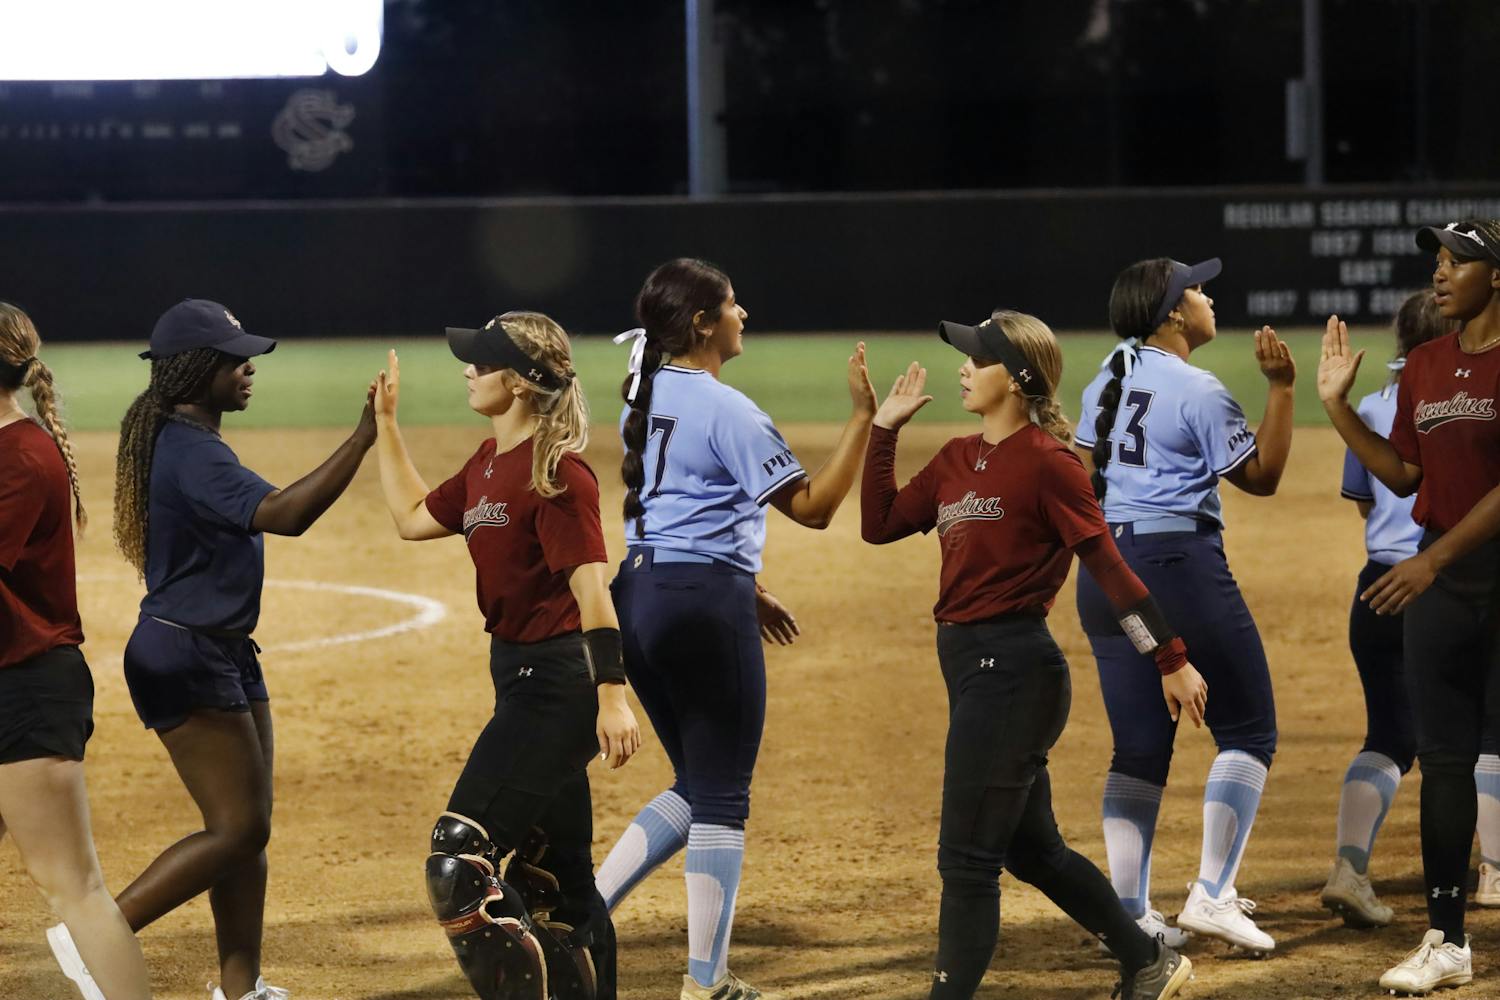 The Gamecock softball team high-fives members of 鶹С򽴫ý Beaufort's team after the two squared off in an exhibition at Beckham Field on Oct. 7, 2023. The 3-0 win over 鶹С򽴫ý Beaufort was South Carolina's second of the day following a 14-0 win over Wofford.